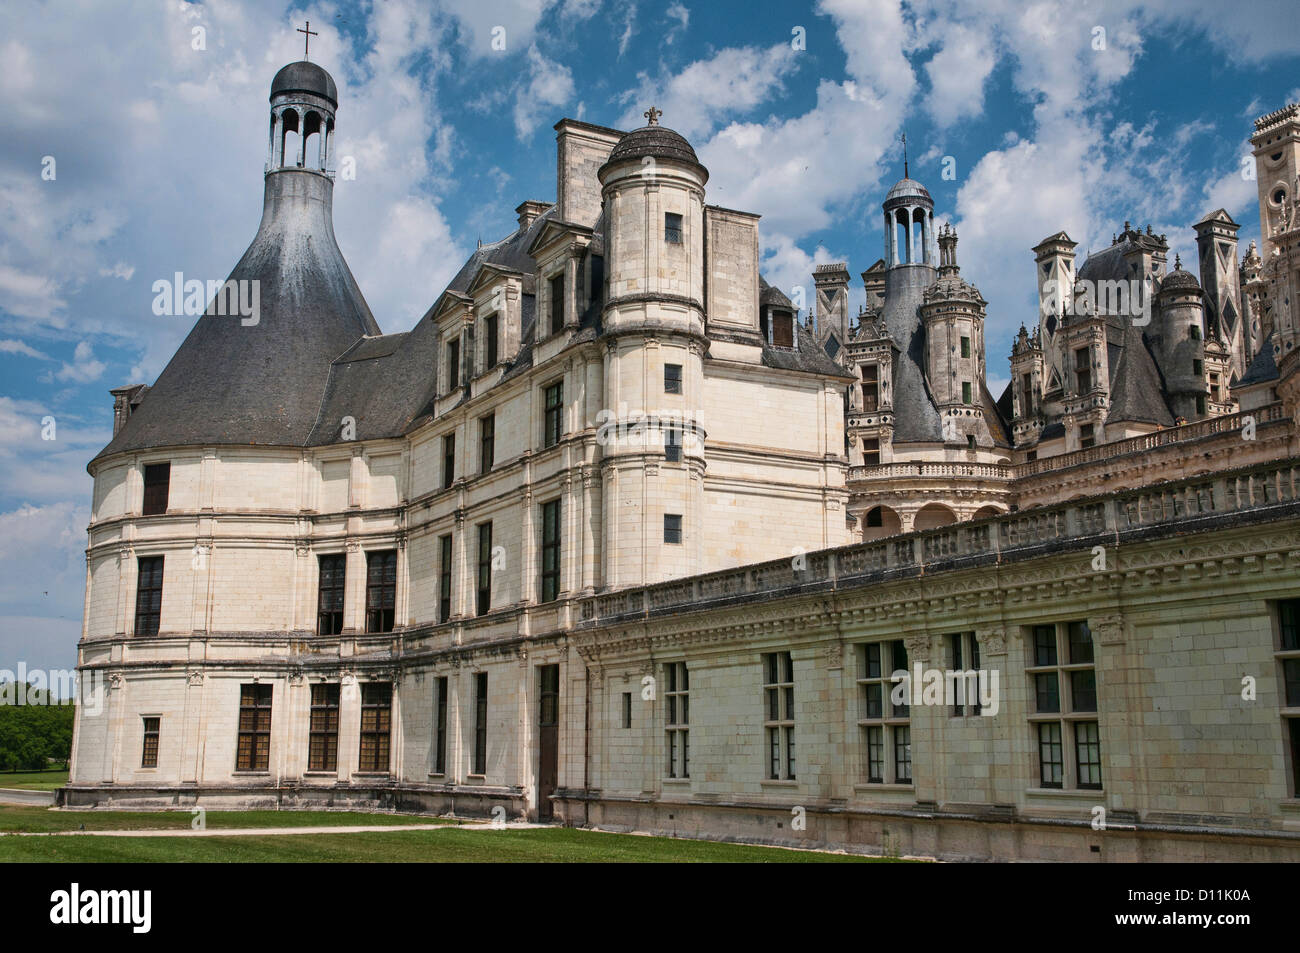 The royal Château de Chambord at Chambord, Loir-et-Cher, France, is one of the most beautiful châteaux in the world. Stock Photo